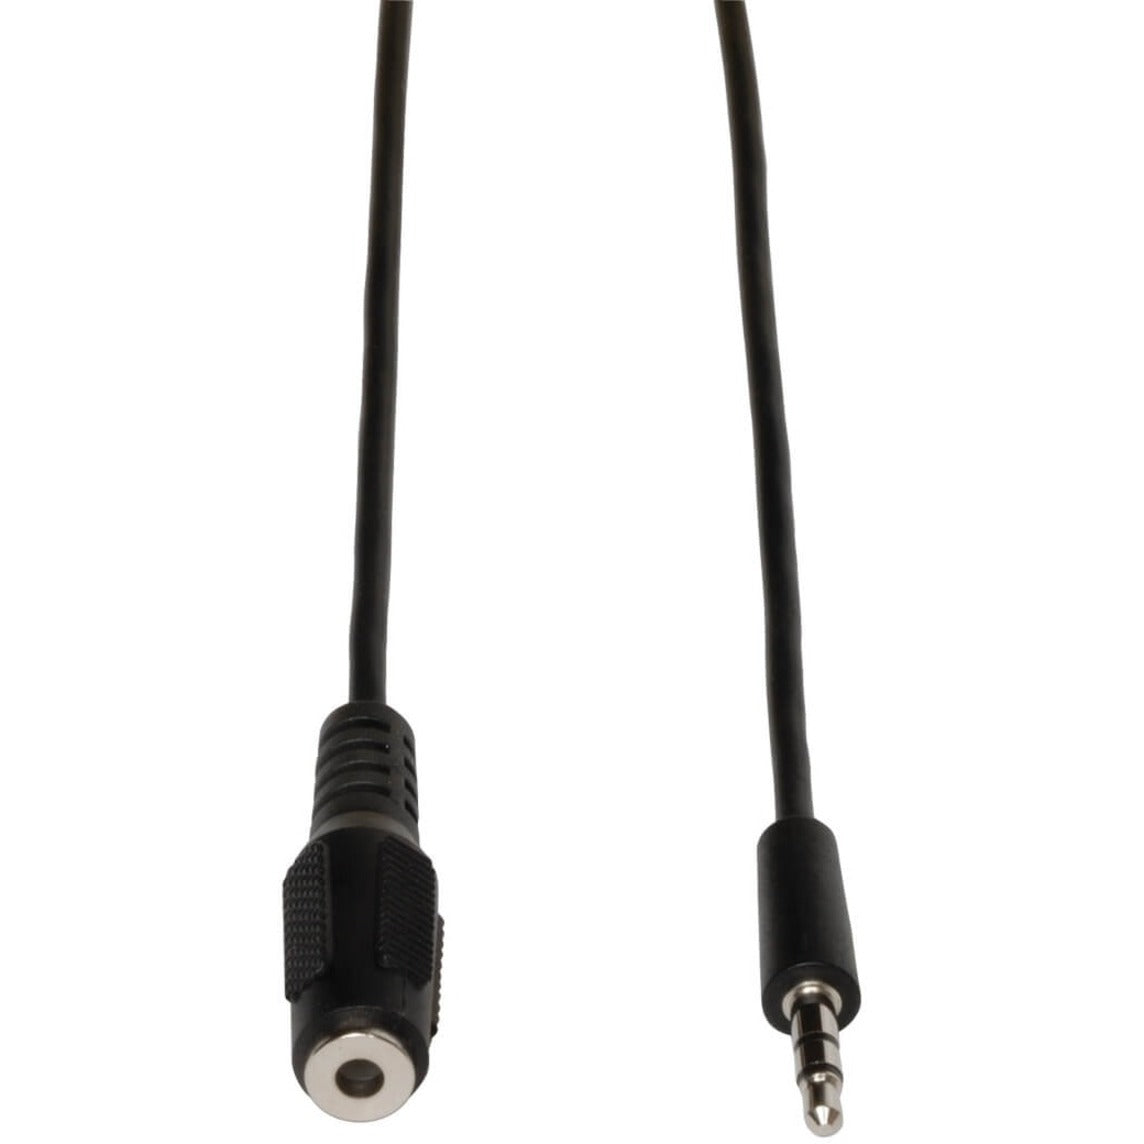 Tripp Lite P311-025 25ft 3.5mm M/F Mini-Stereo Audio Extension Cable, Molded, Copper Conductor, Shielded, Nickel Plated Connectors